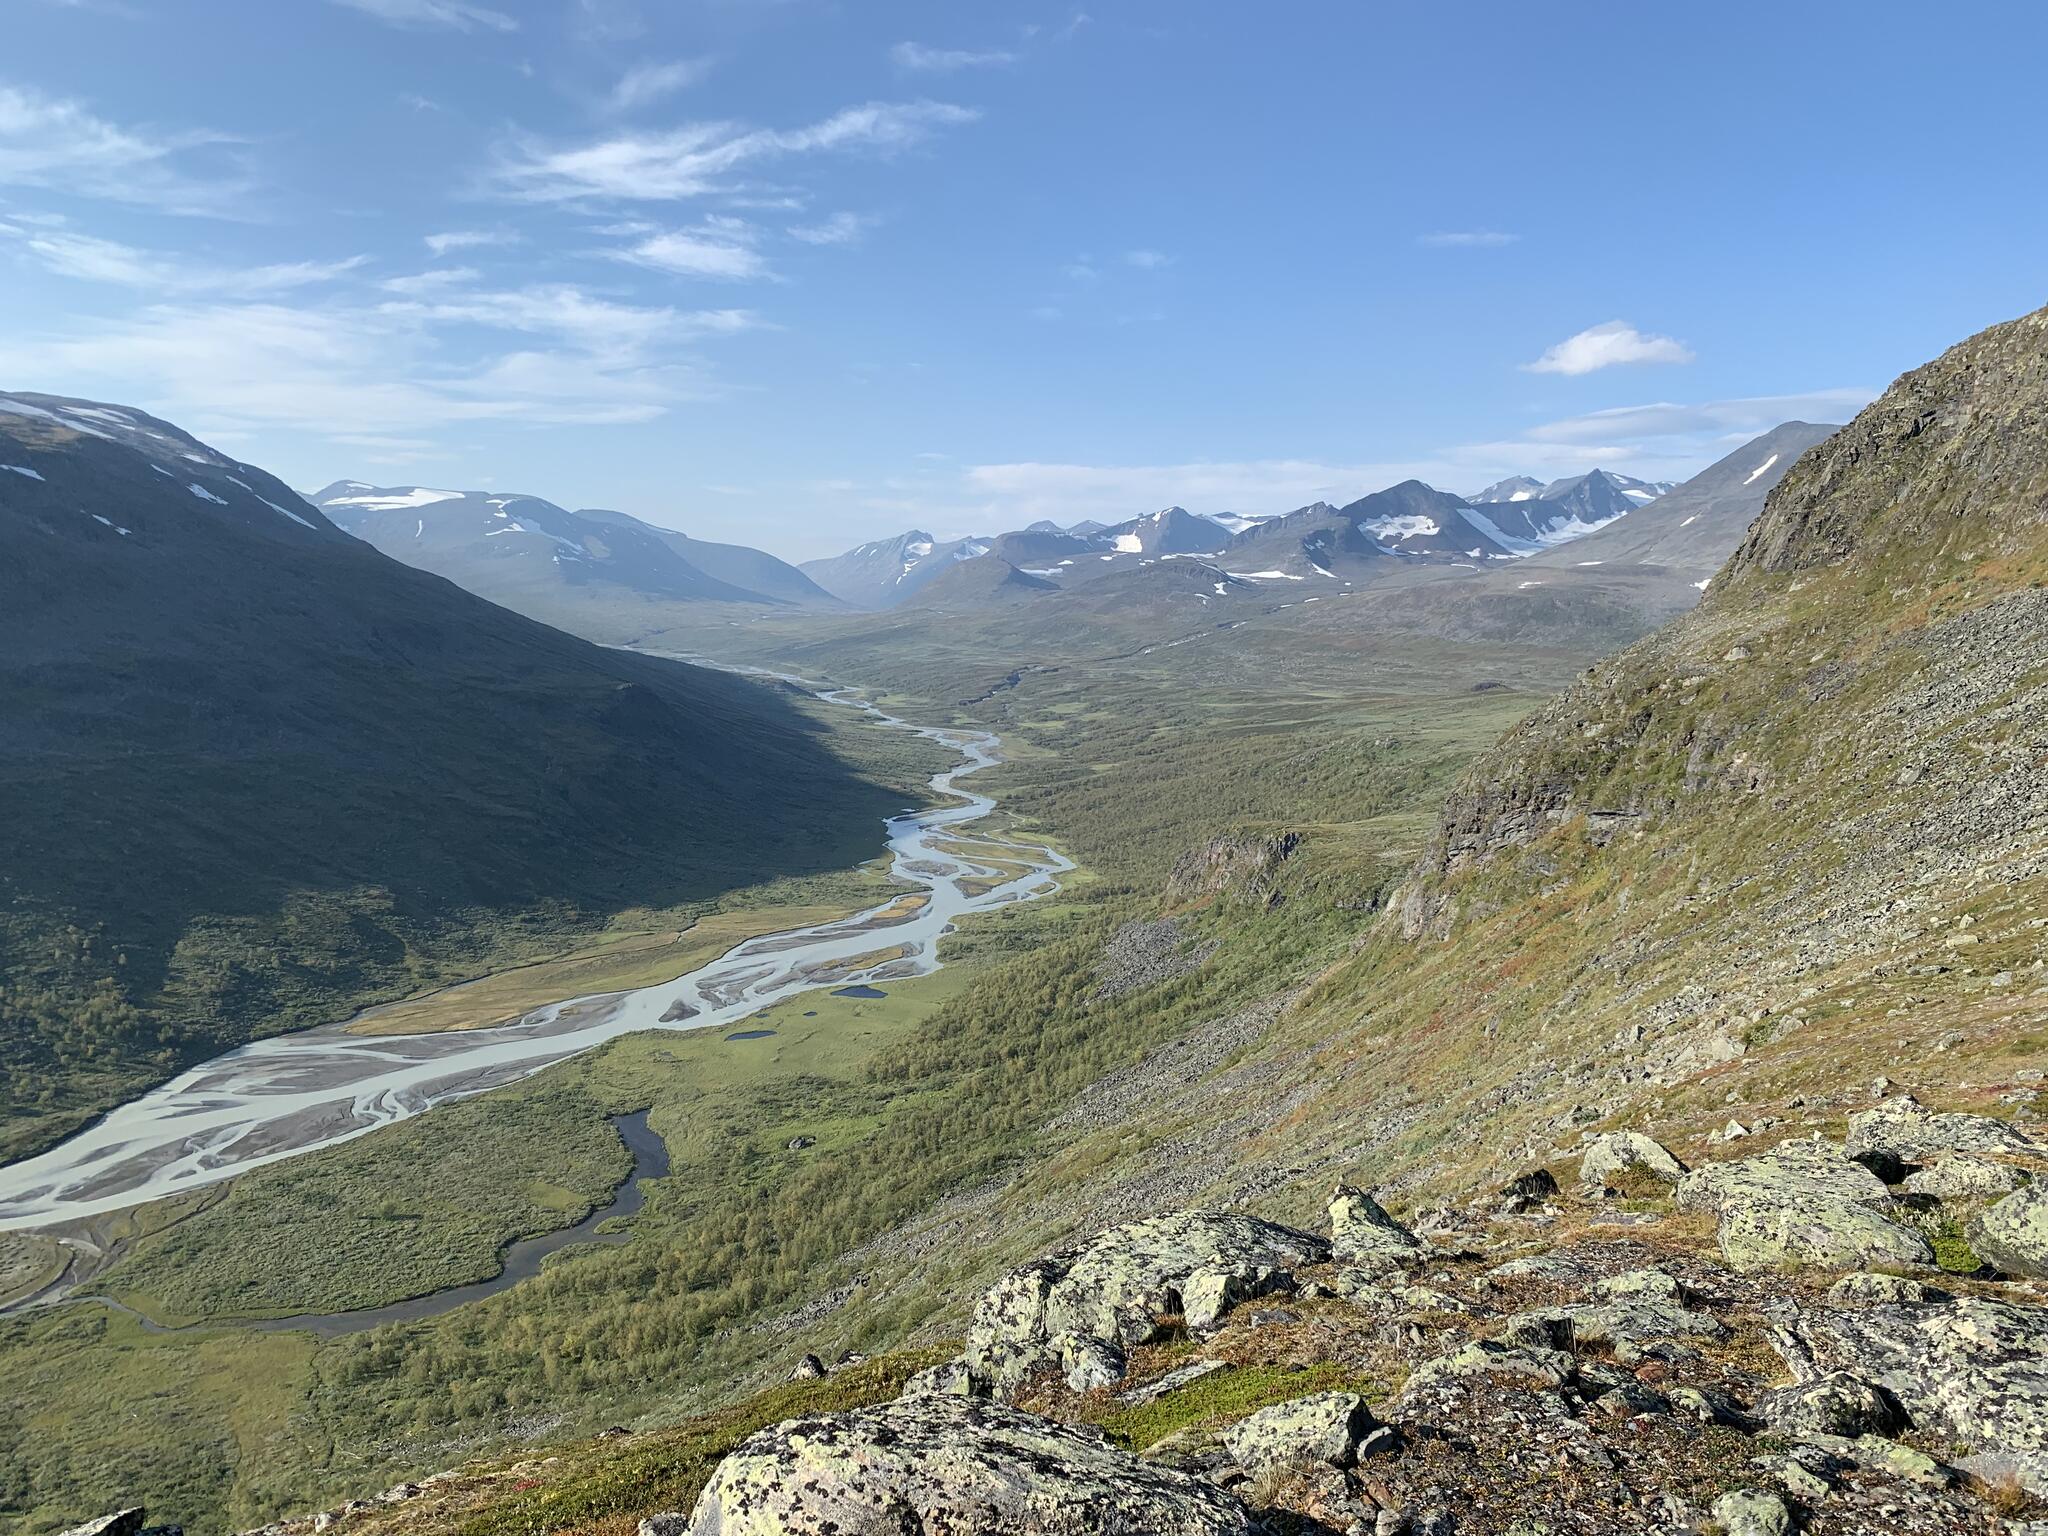 The upper Rapadalen and Skarja seen from Snavvavagge.  The path passes just below the cliff on the right.